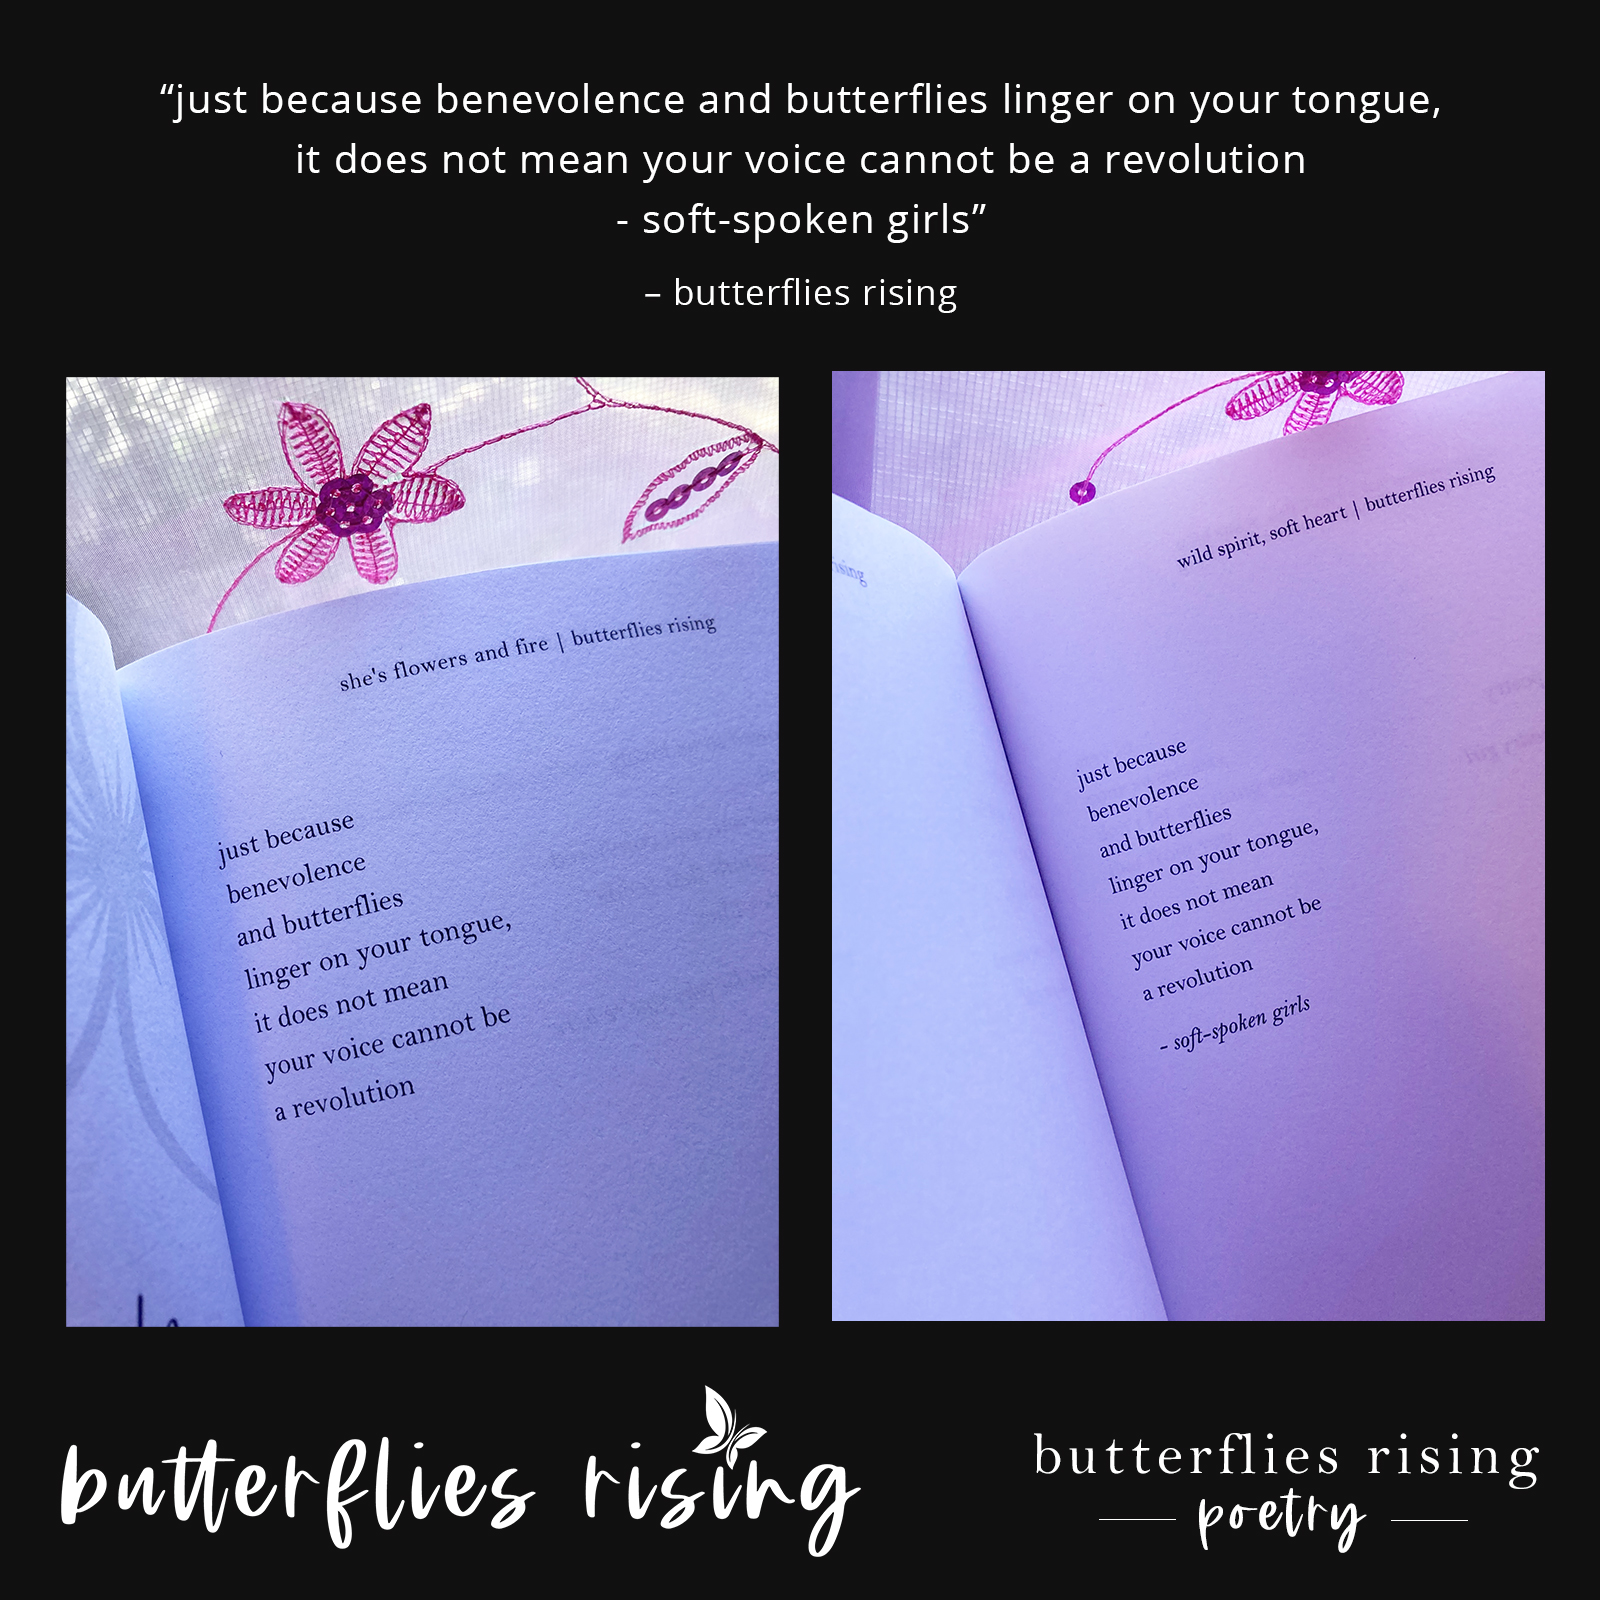 benevolence and butterflies linger on your tongue - butterflies rising poem